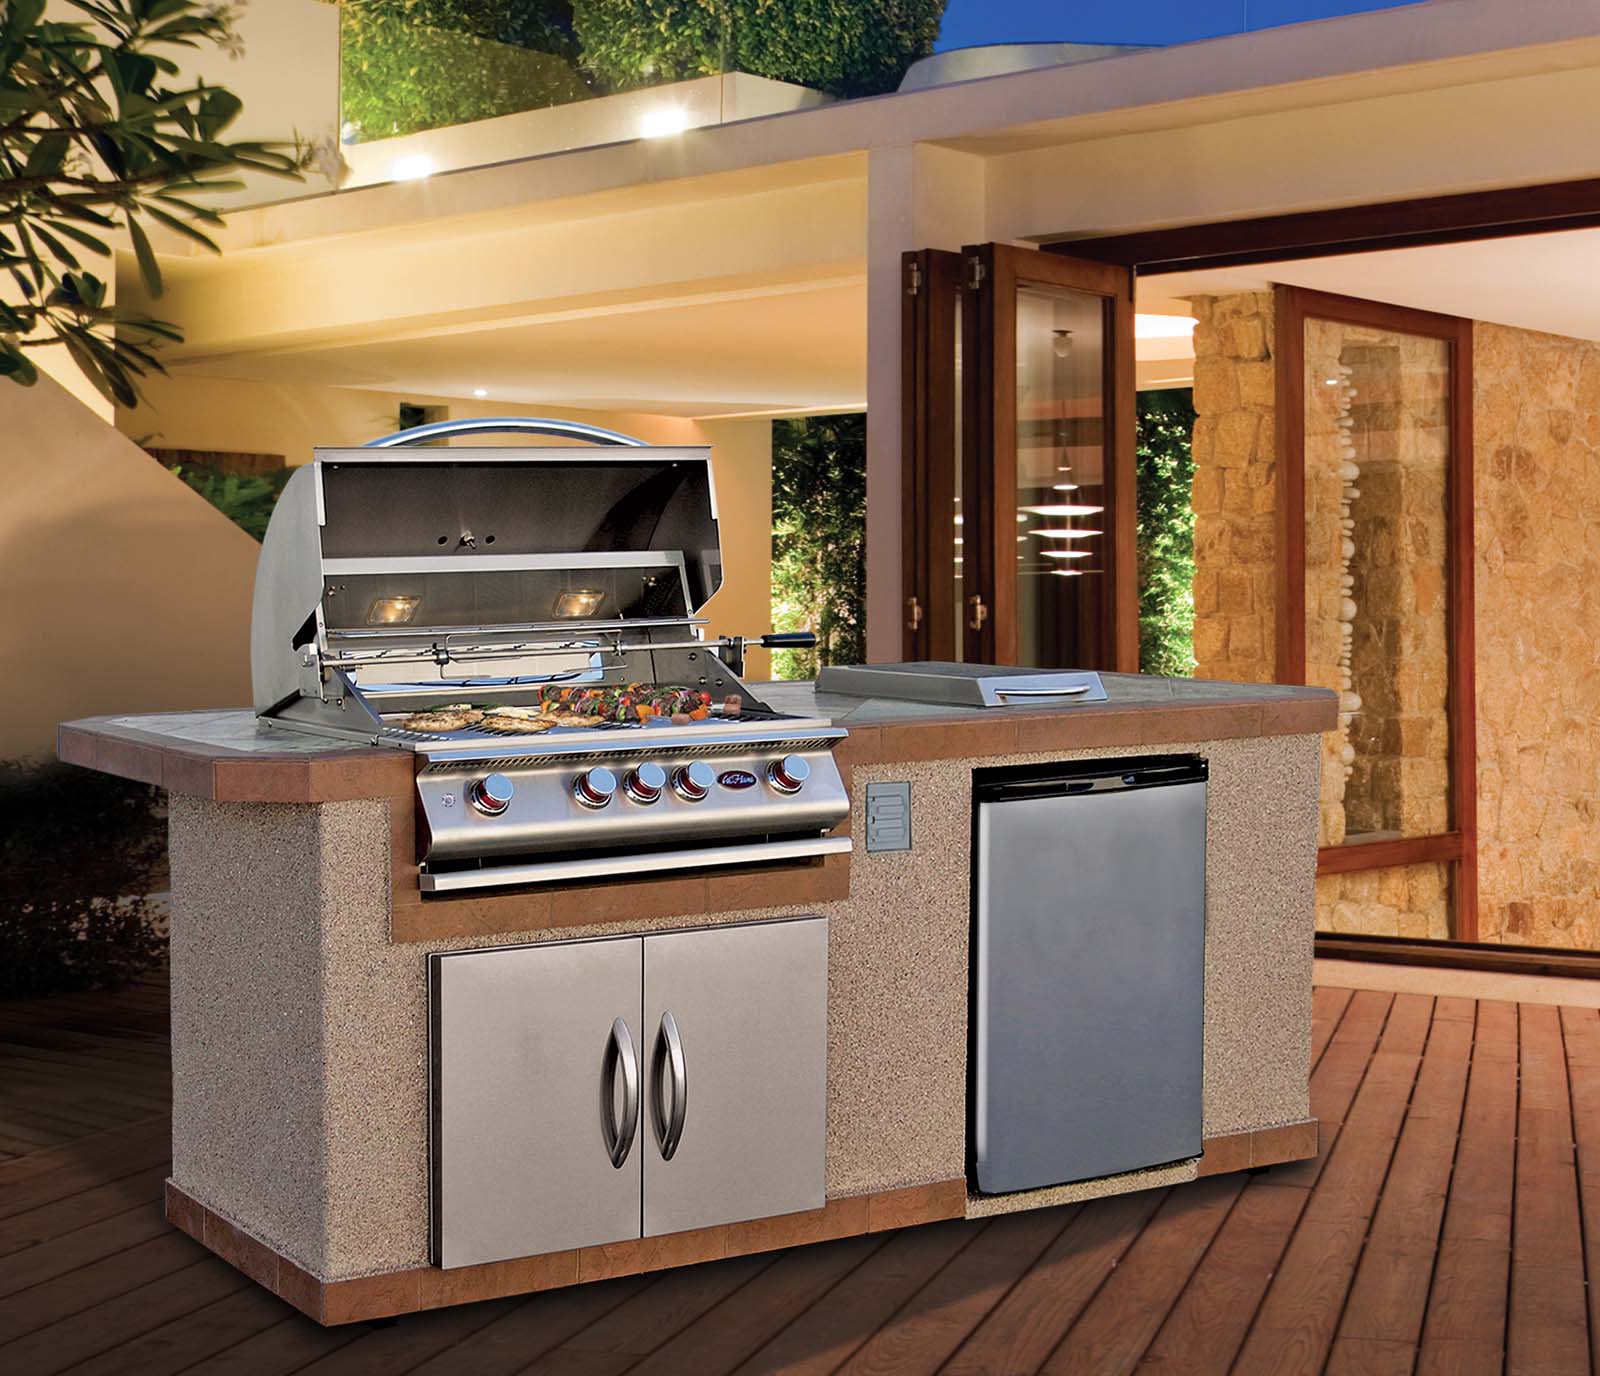 Electric Grill Island with Refrigeration - Stacked Stone